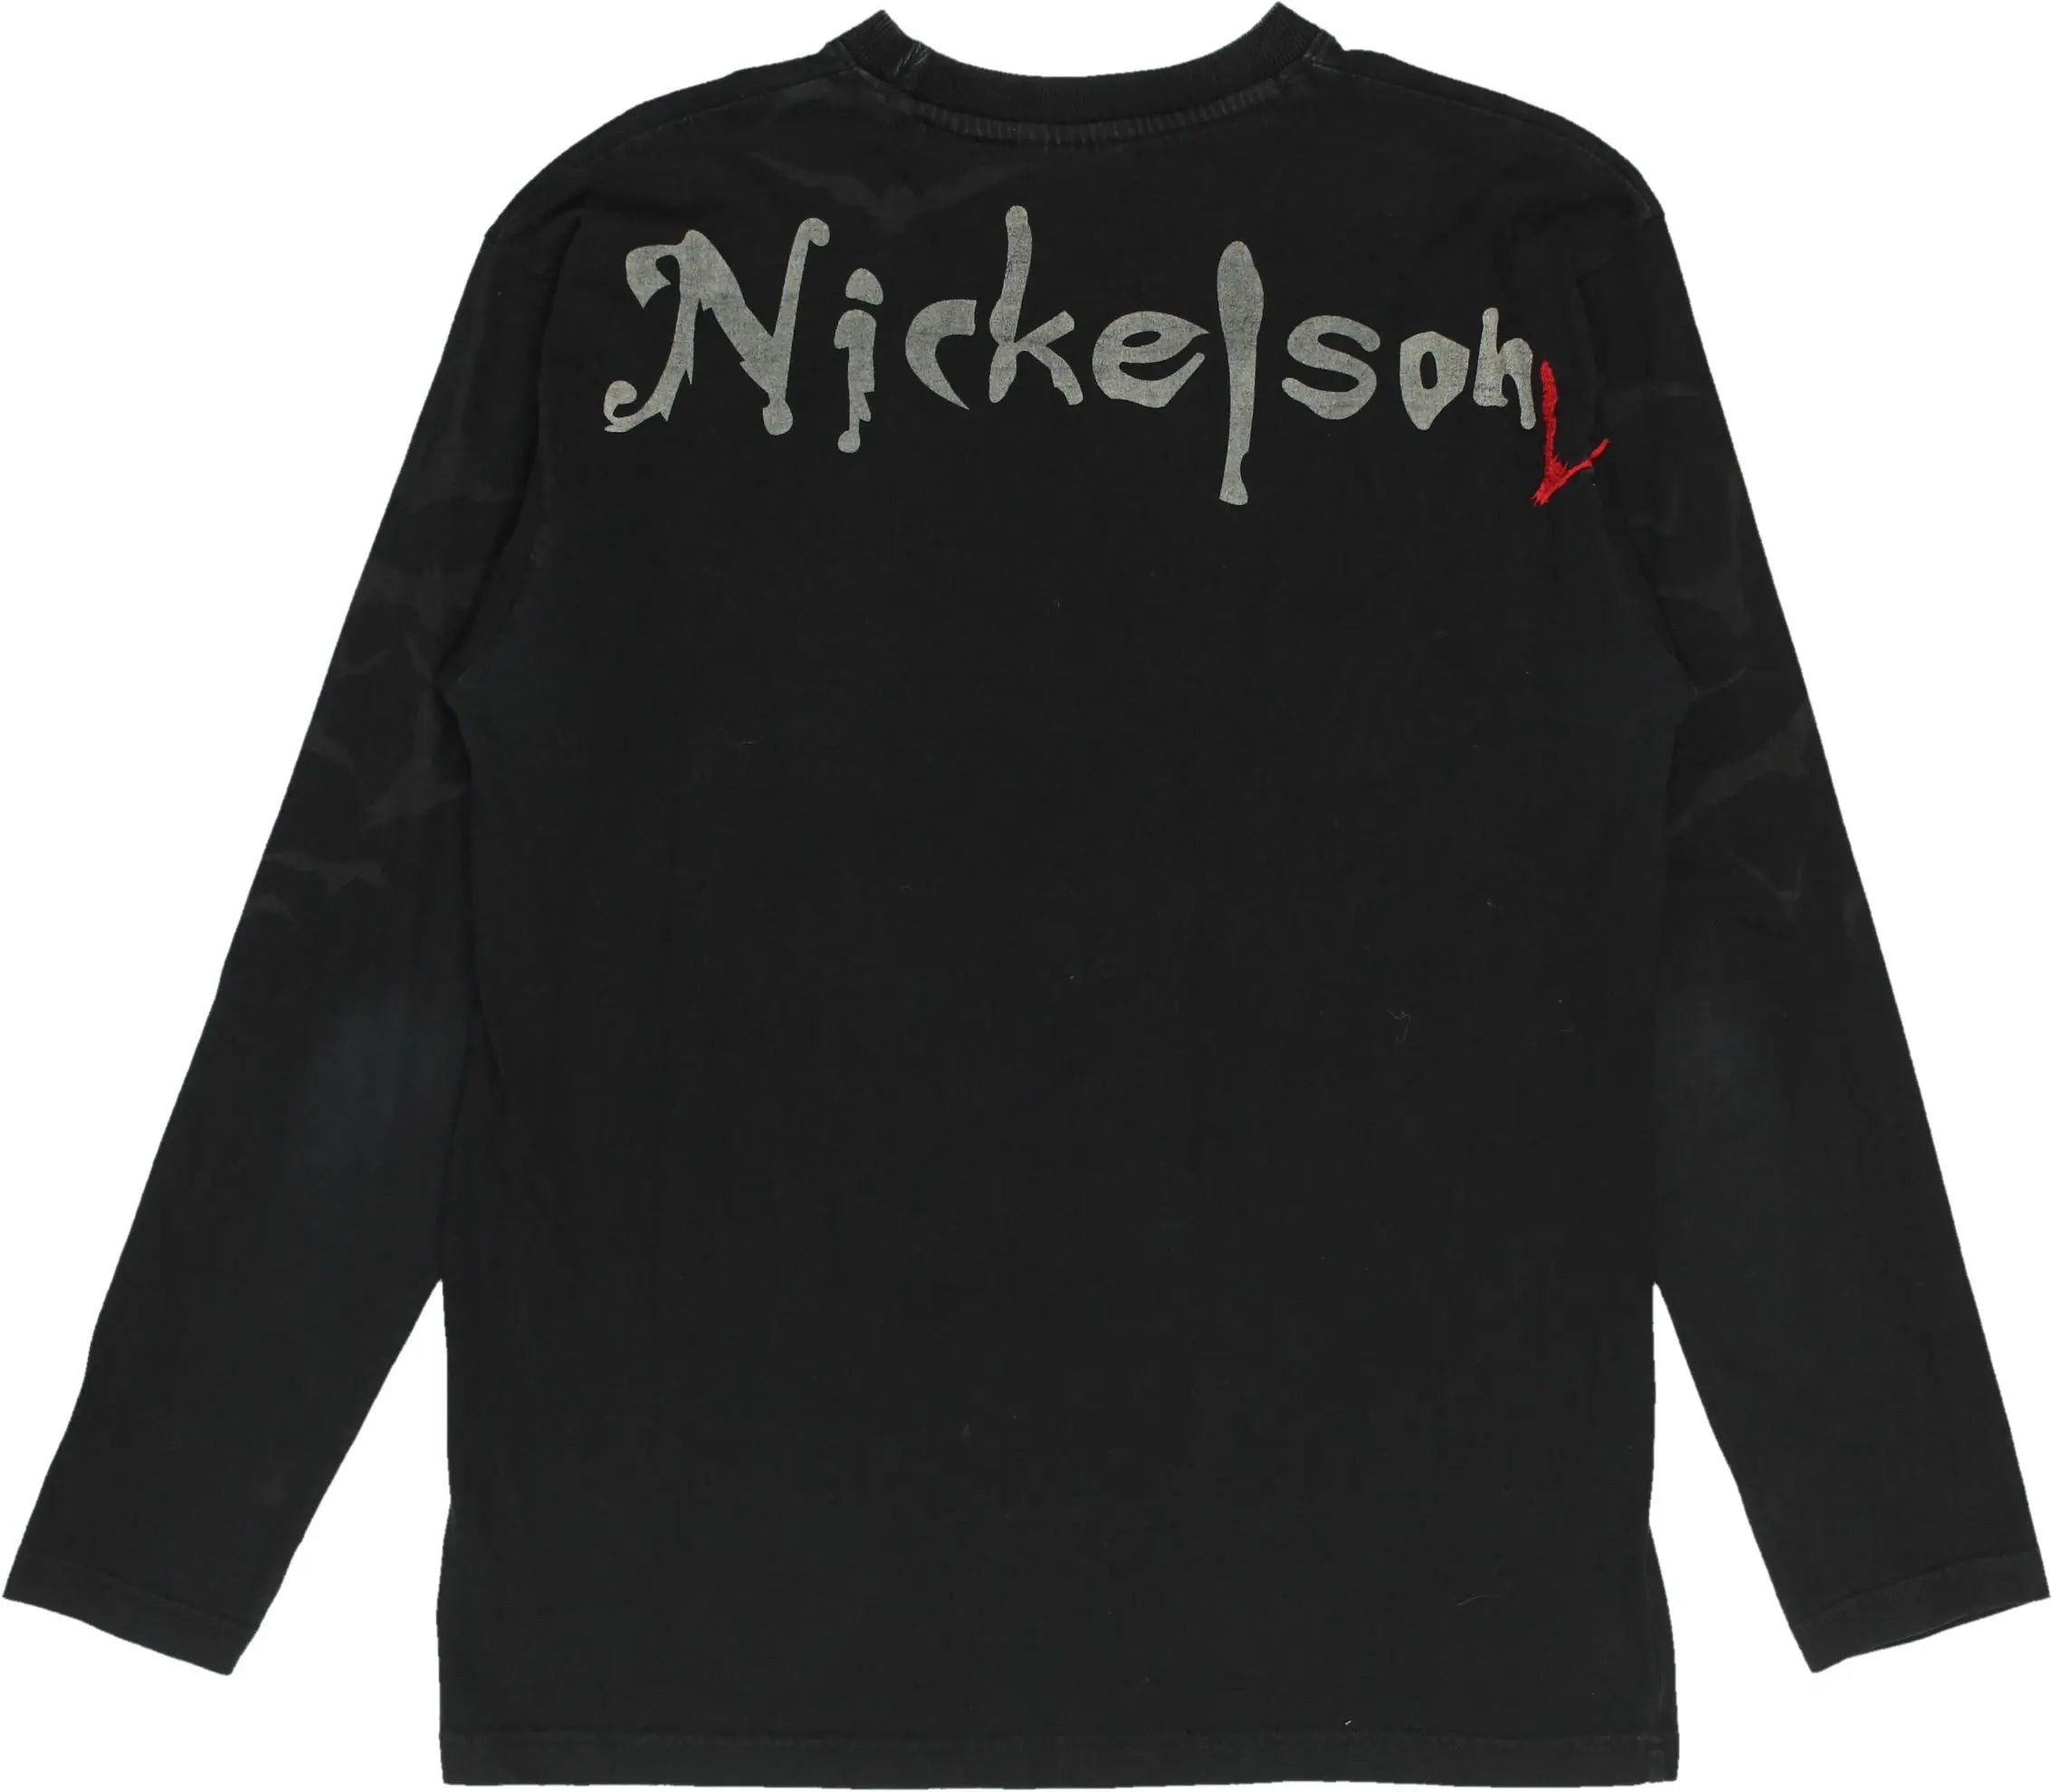 Nickelson - Black Long Sleeve T-shirt by Nickelson- ThriftTale.com - Vintage and second handclothing